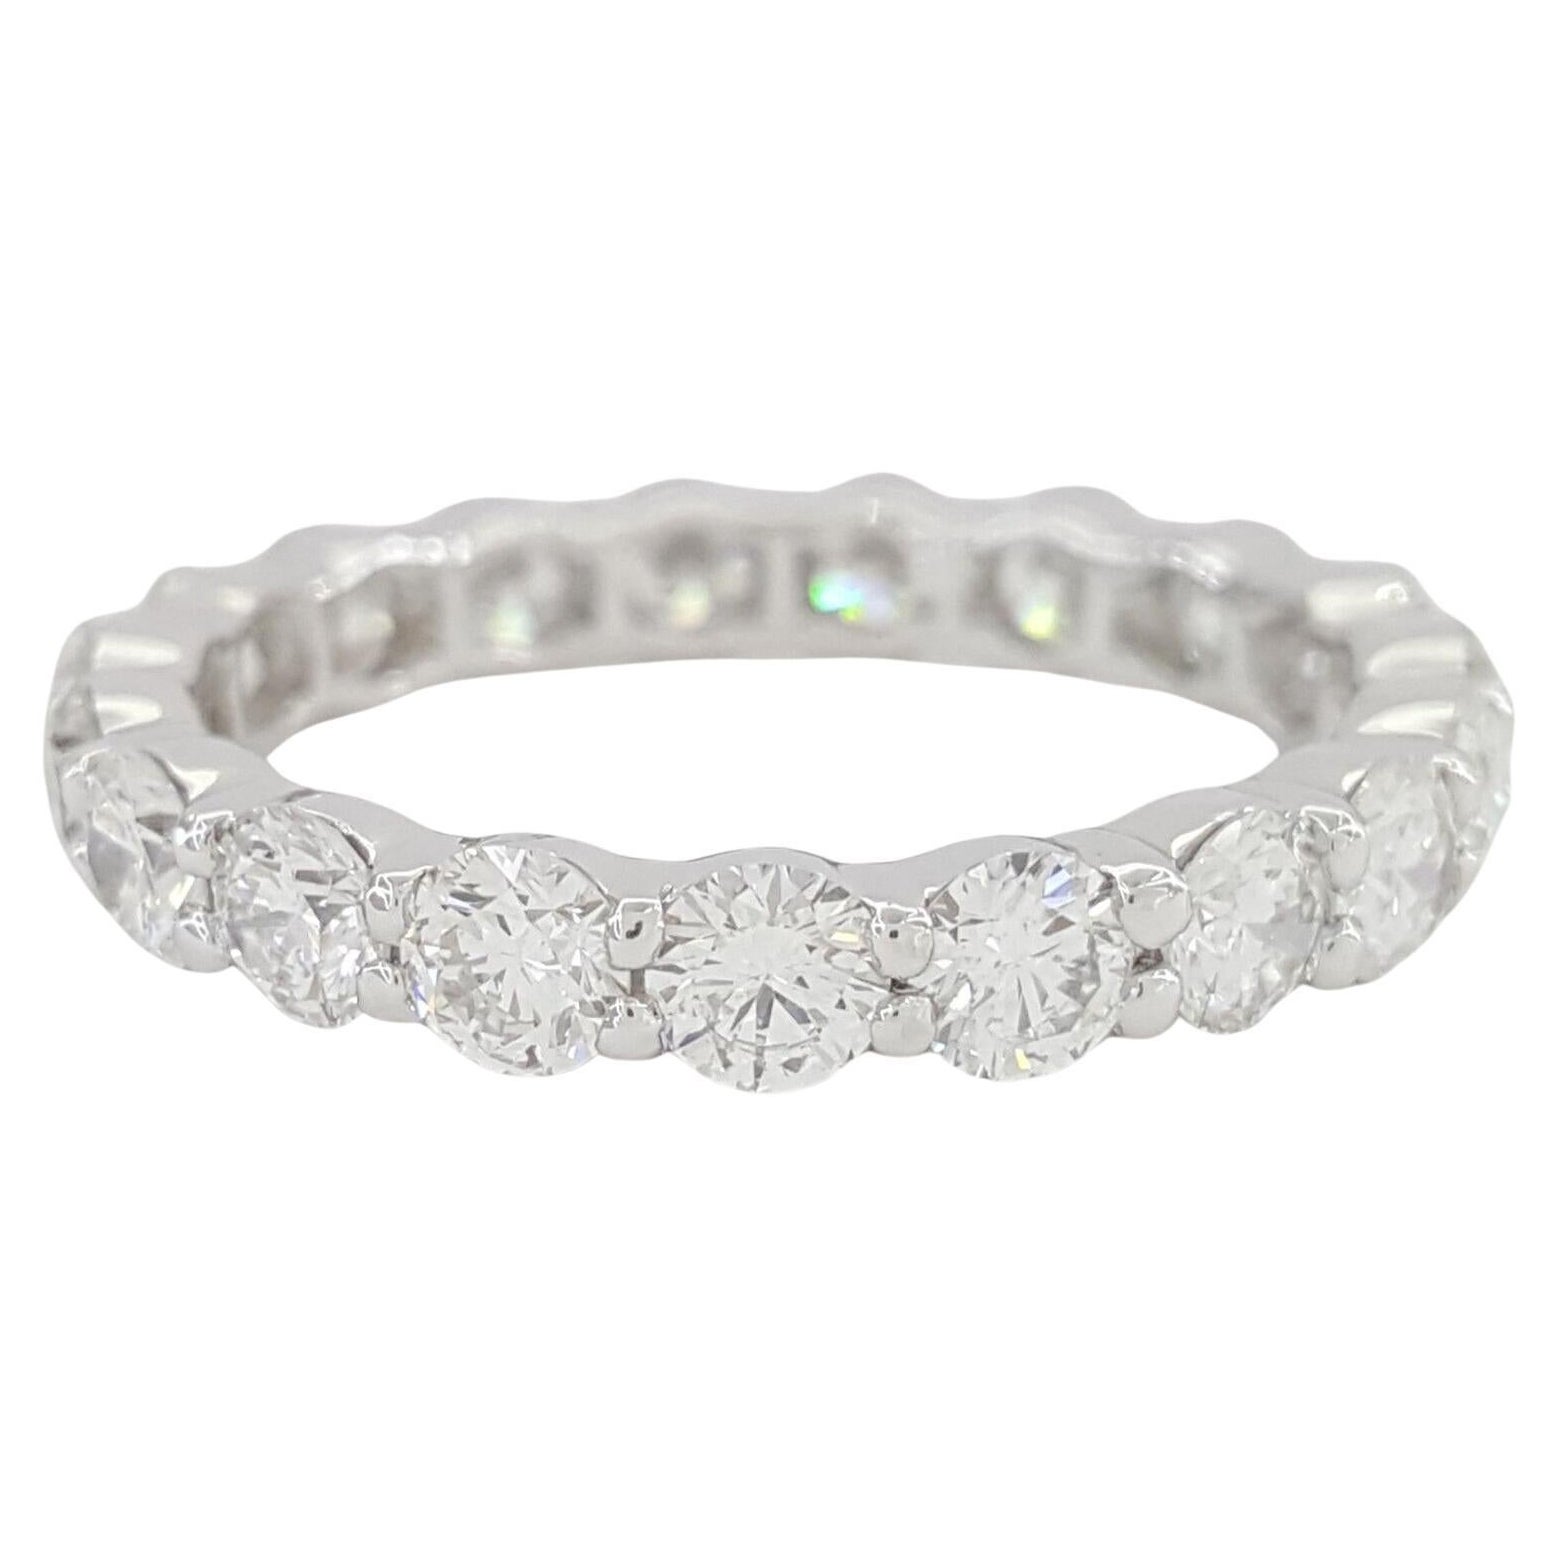 2 Carat Round Diamond Eternity Band Ring For Sale